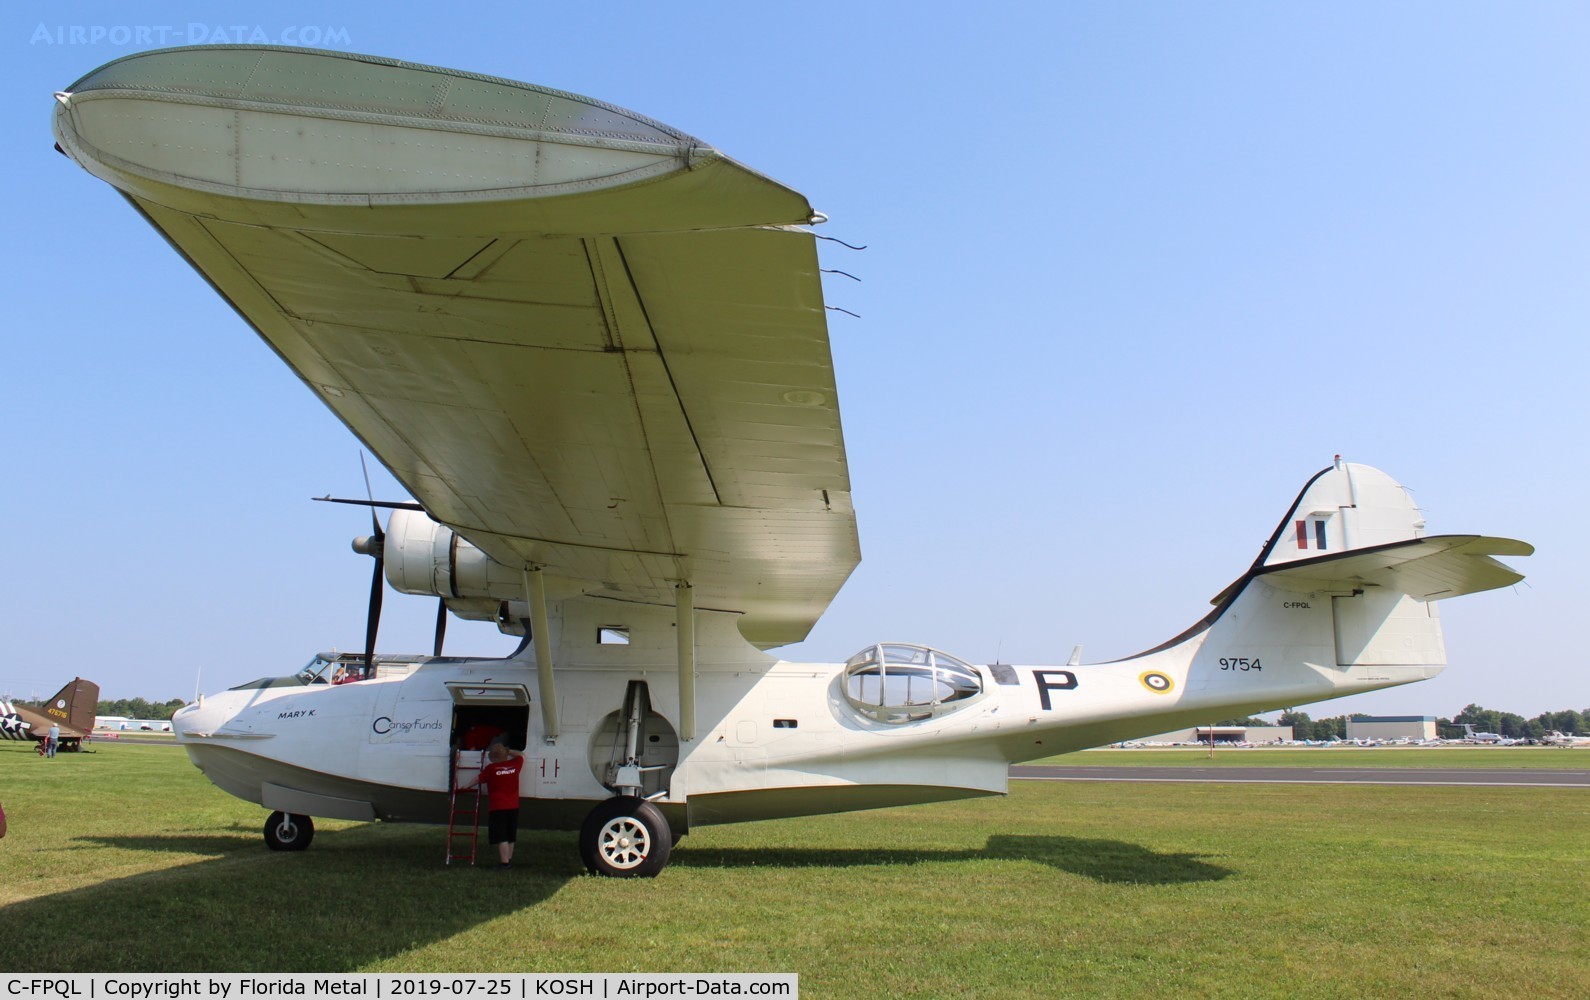 C-FPQL, 1940 Consolidated Vultee PBY-5A C/N CV-417, Catalina